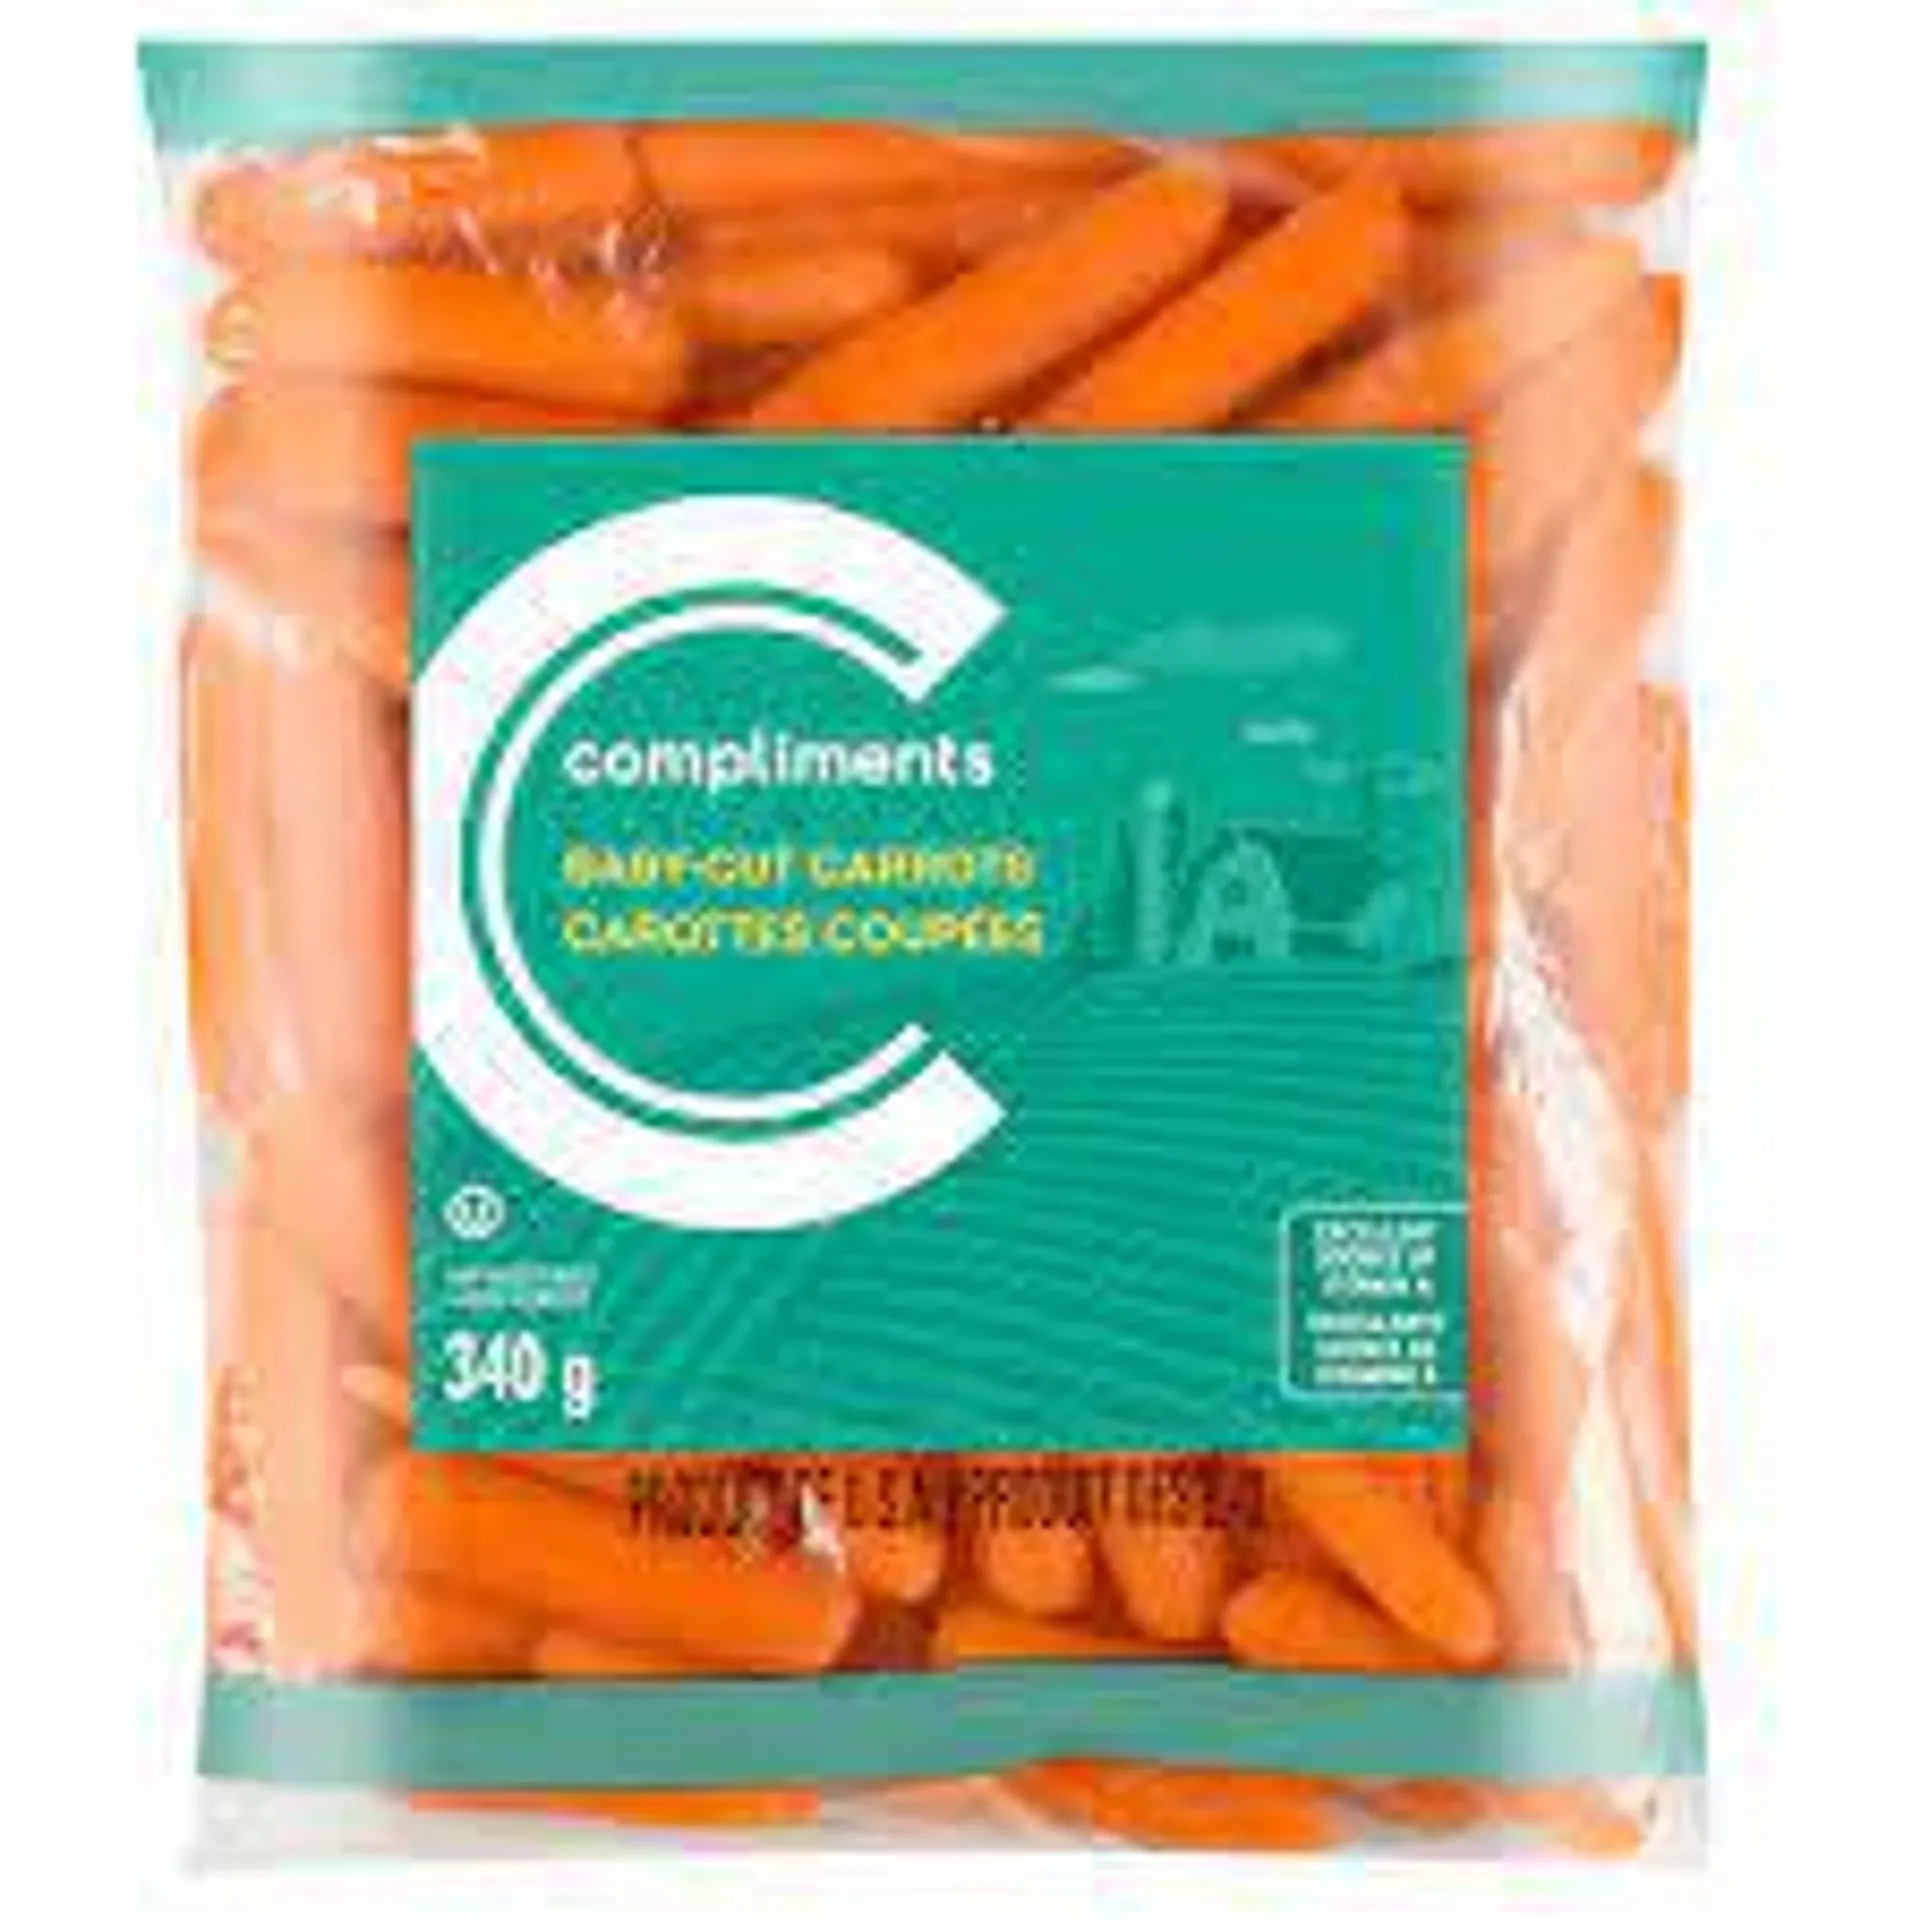 COMPLIMENTS BABY CUT CARROTS 340g